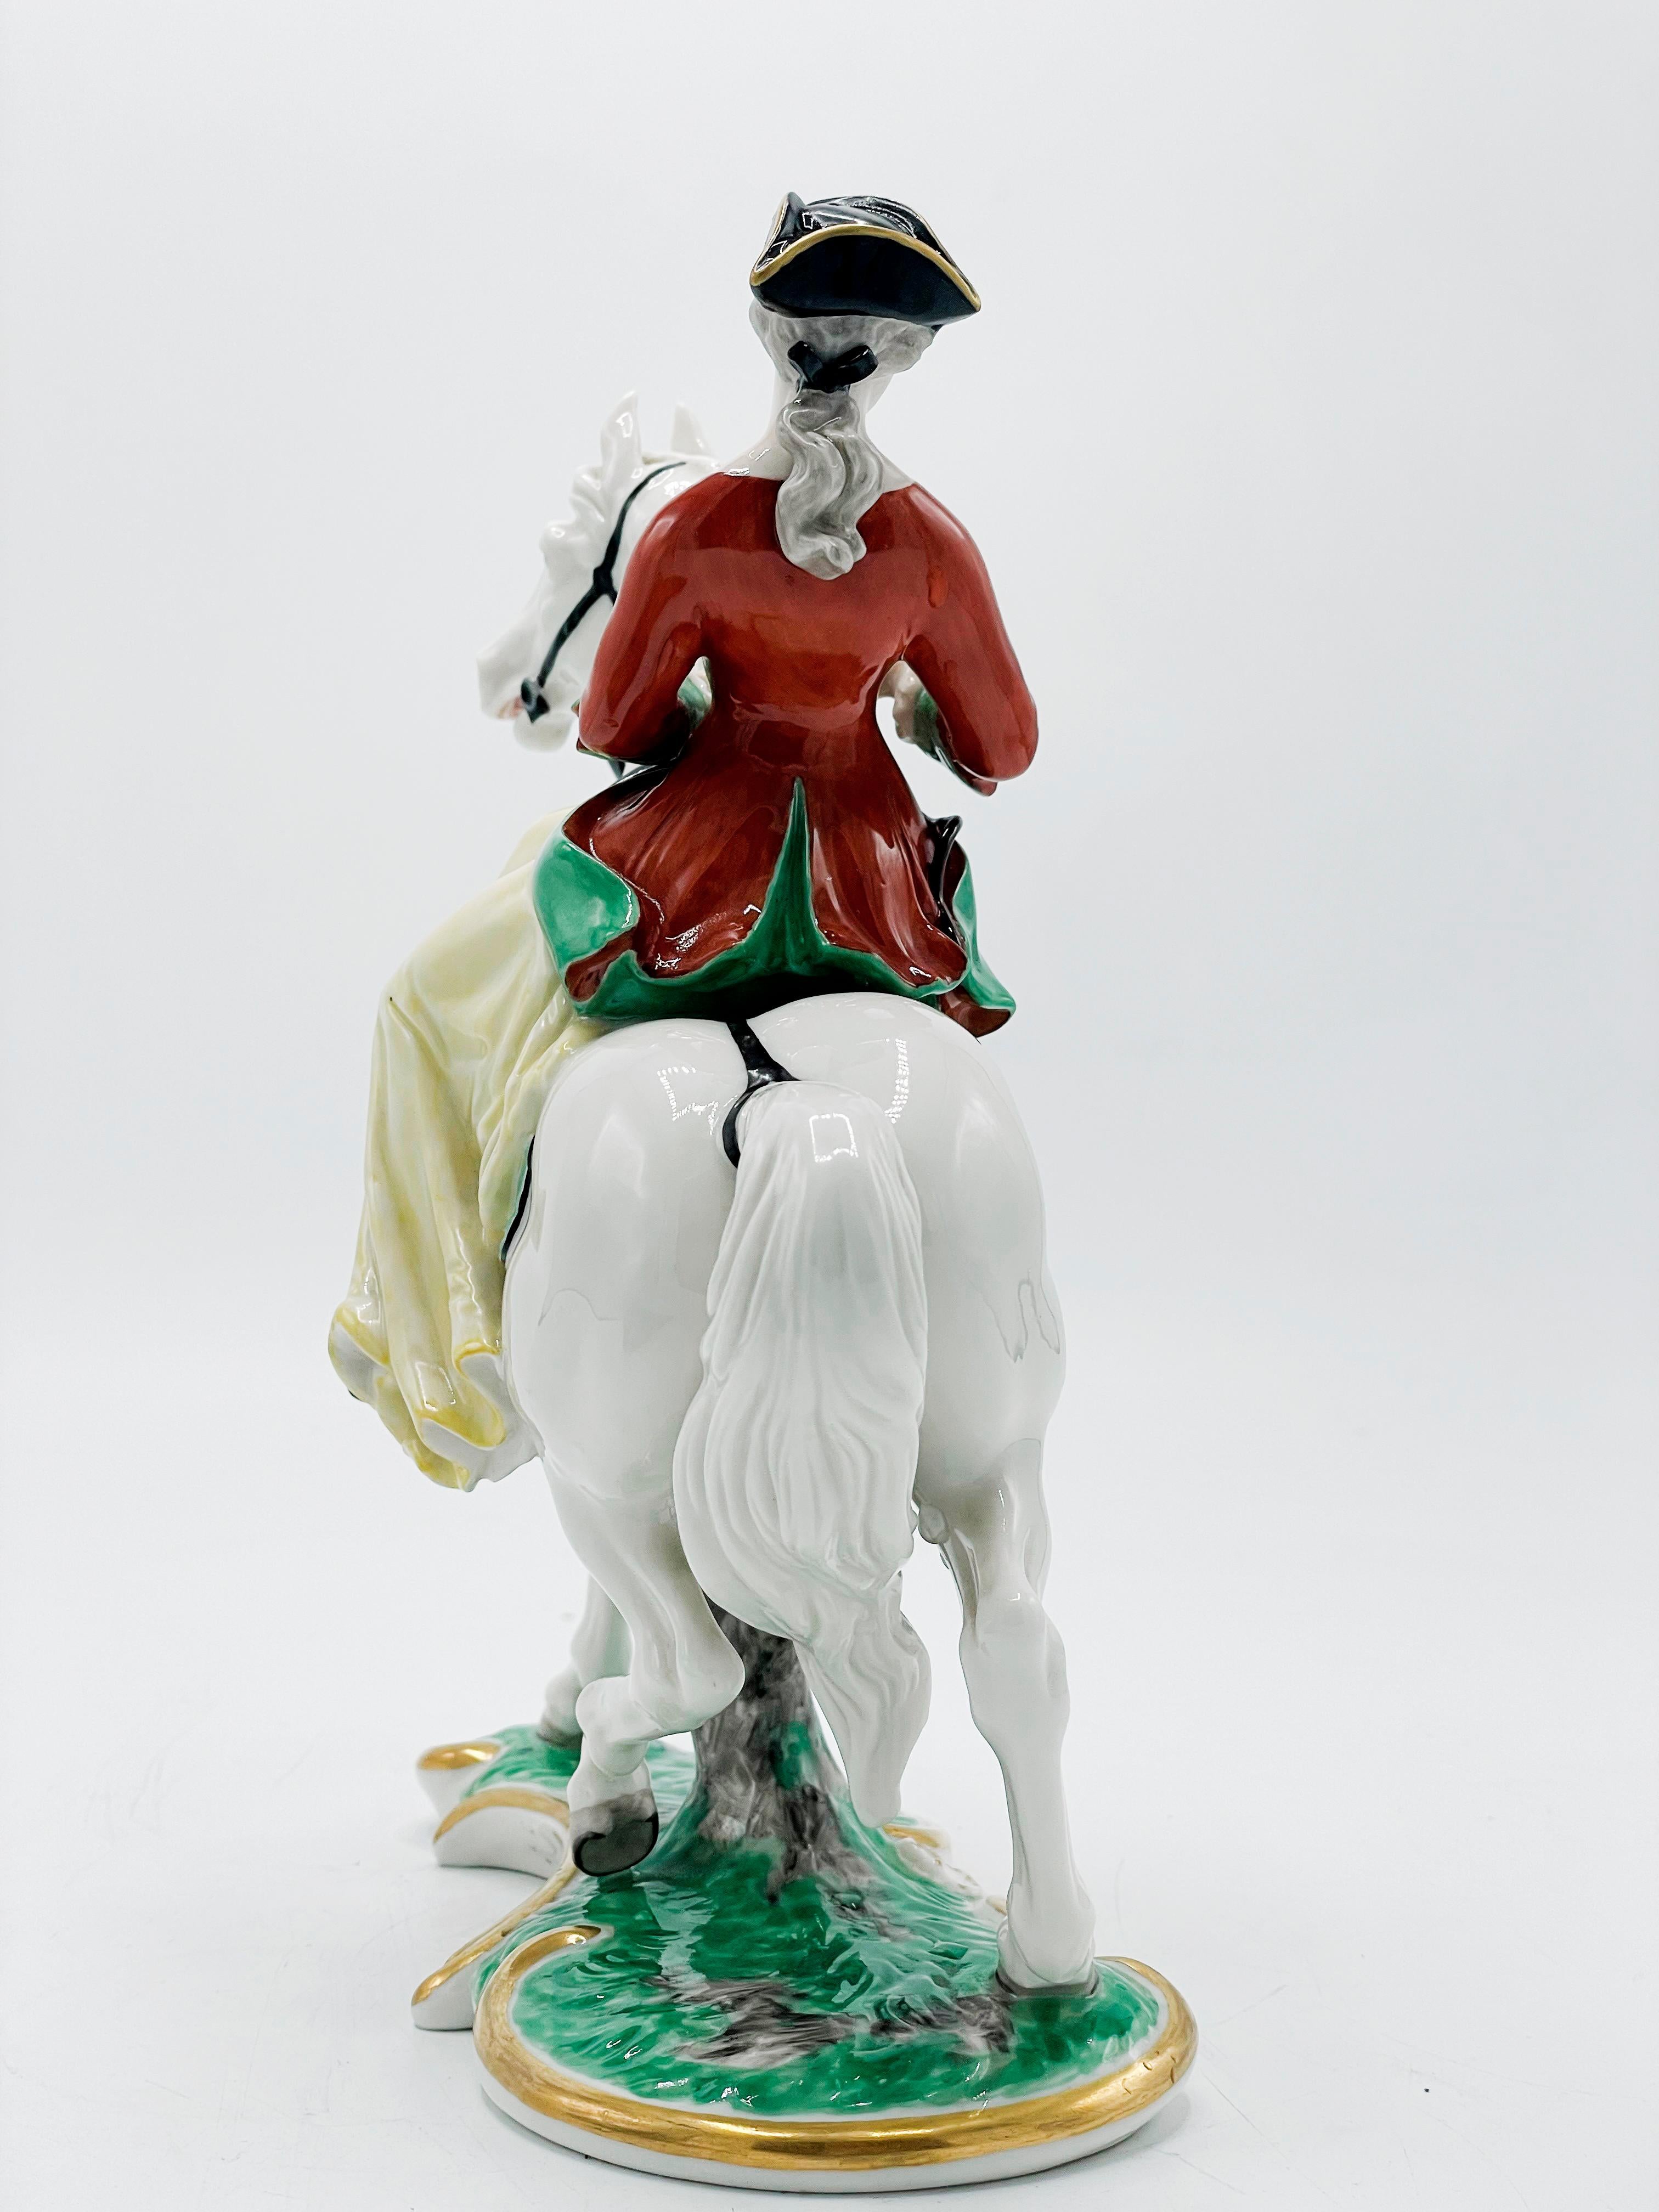 20th Century Theodor Kärner figure Hunting rider pincess MARGARETHE V. Thurn and Taxis. For Sale